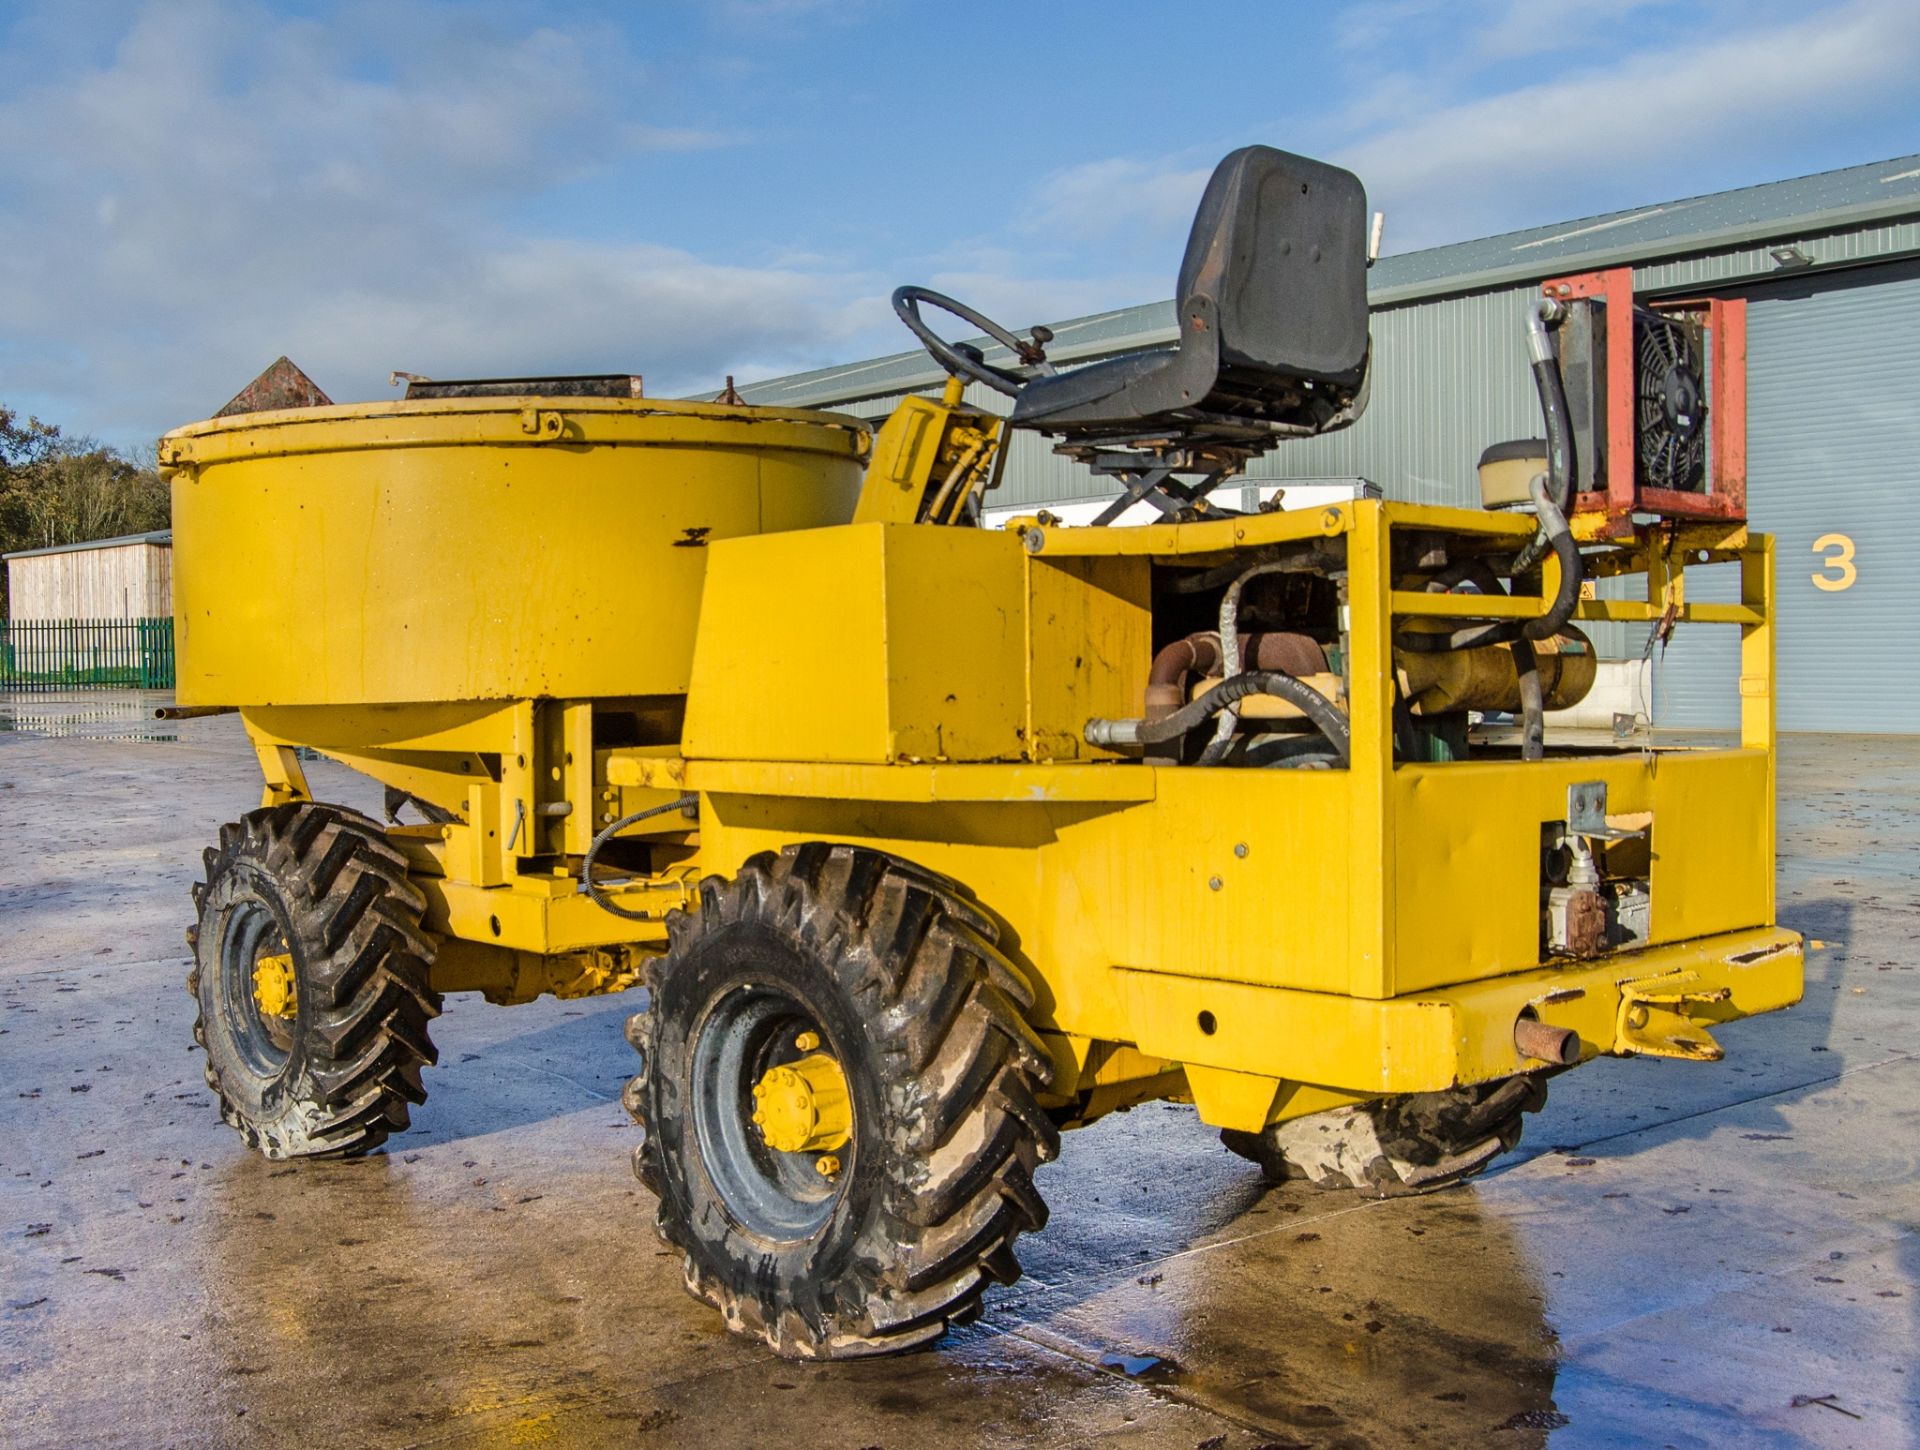 Mobile hydraulic pan mixer converted from a 3 tonne dumper - Image 3 of 19